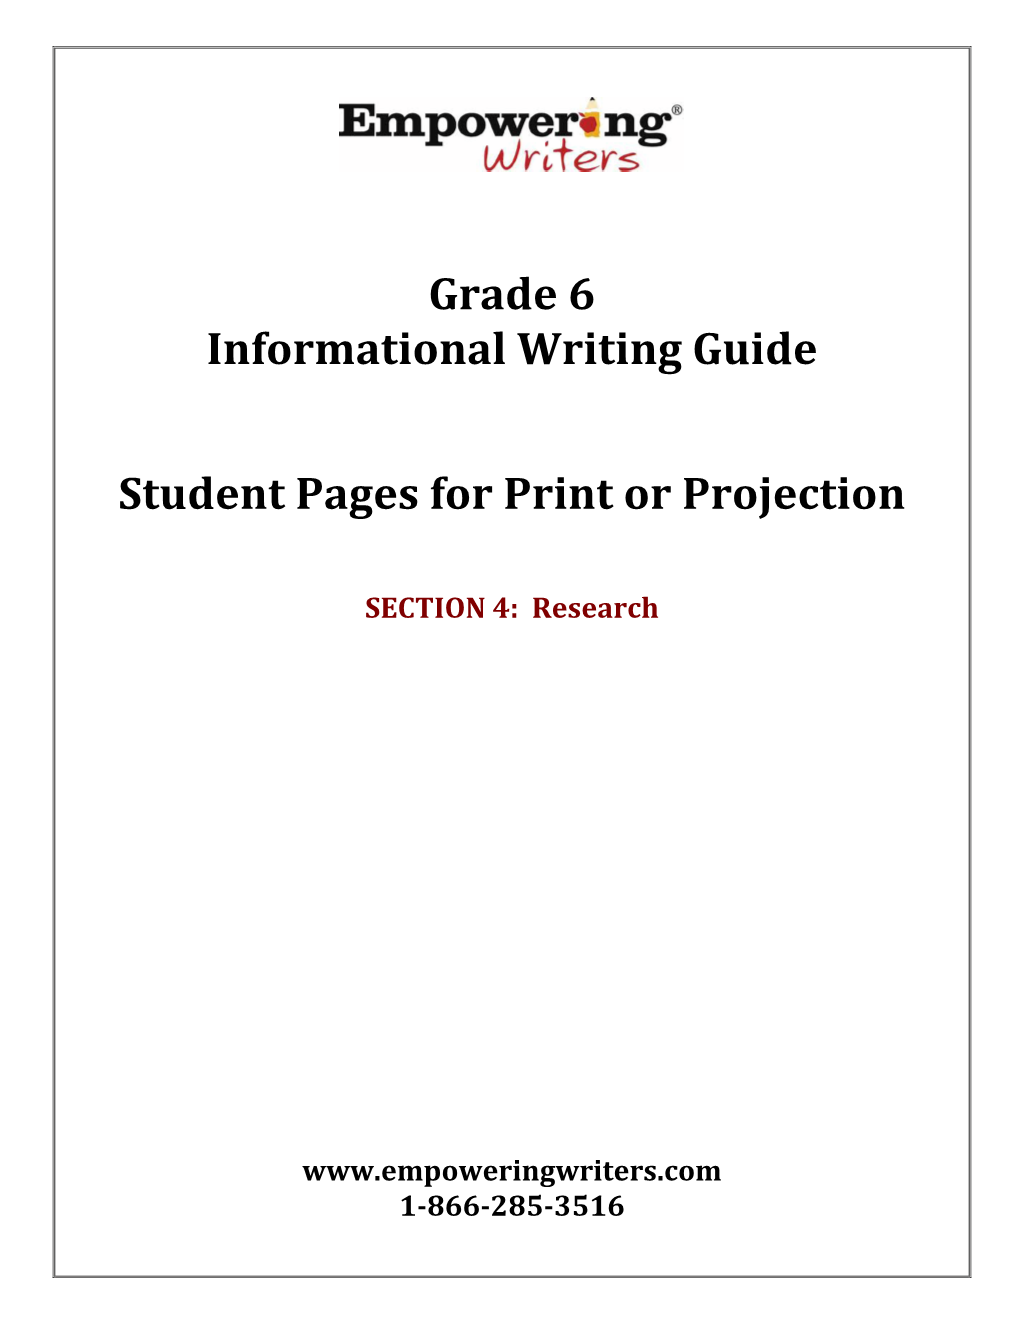 Grade 6 Informational Writing Guide Student Pages for Print Or Projection